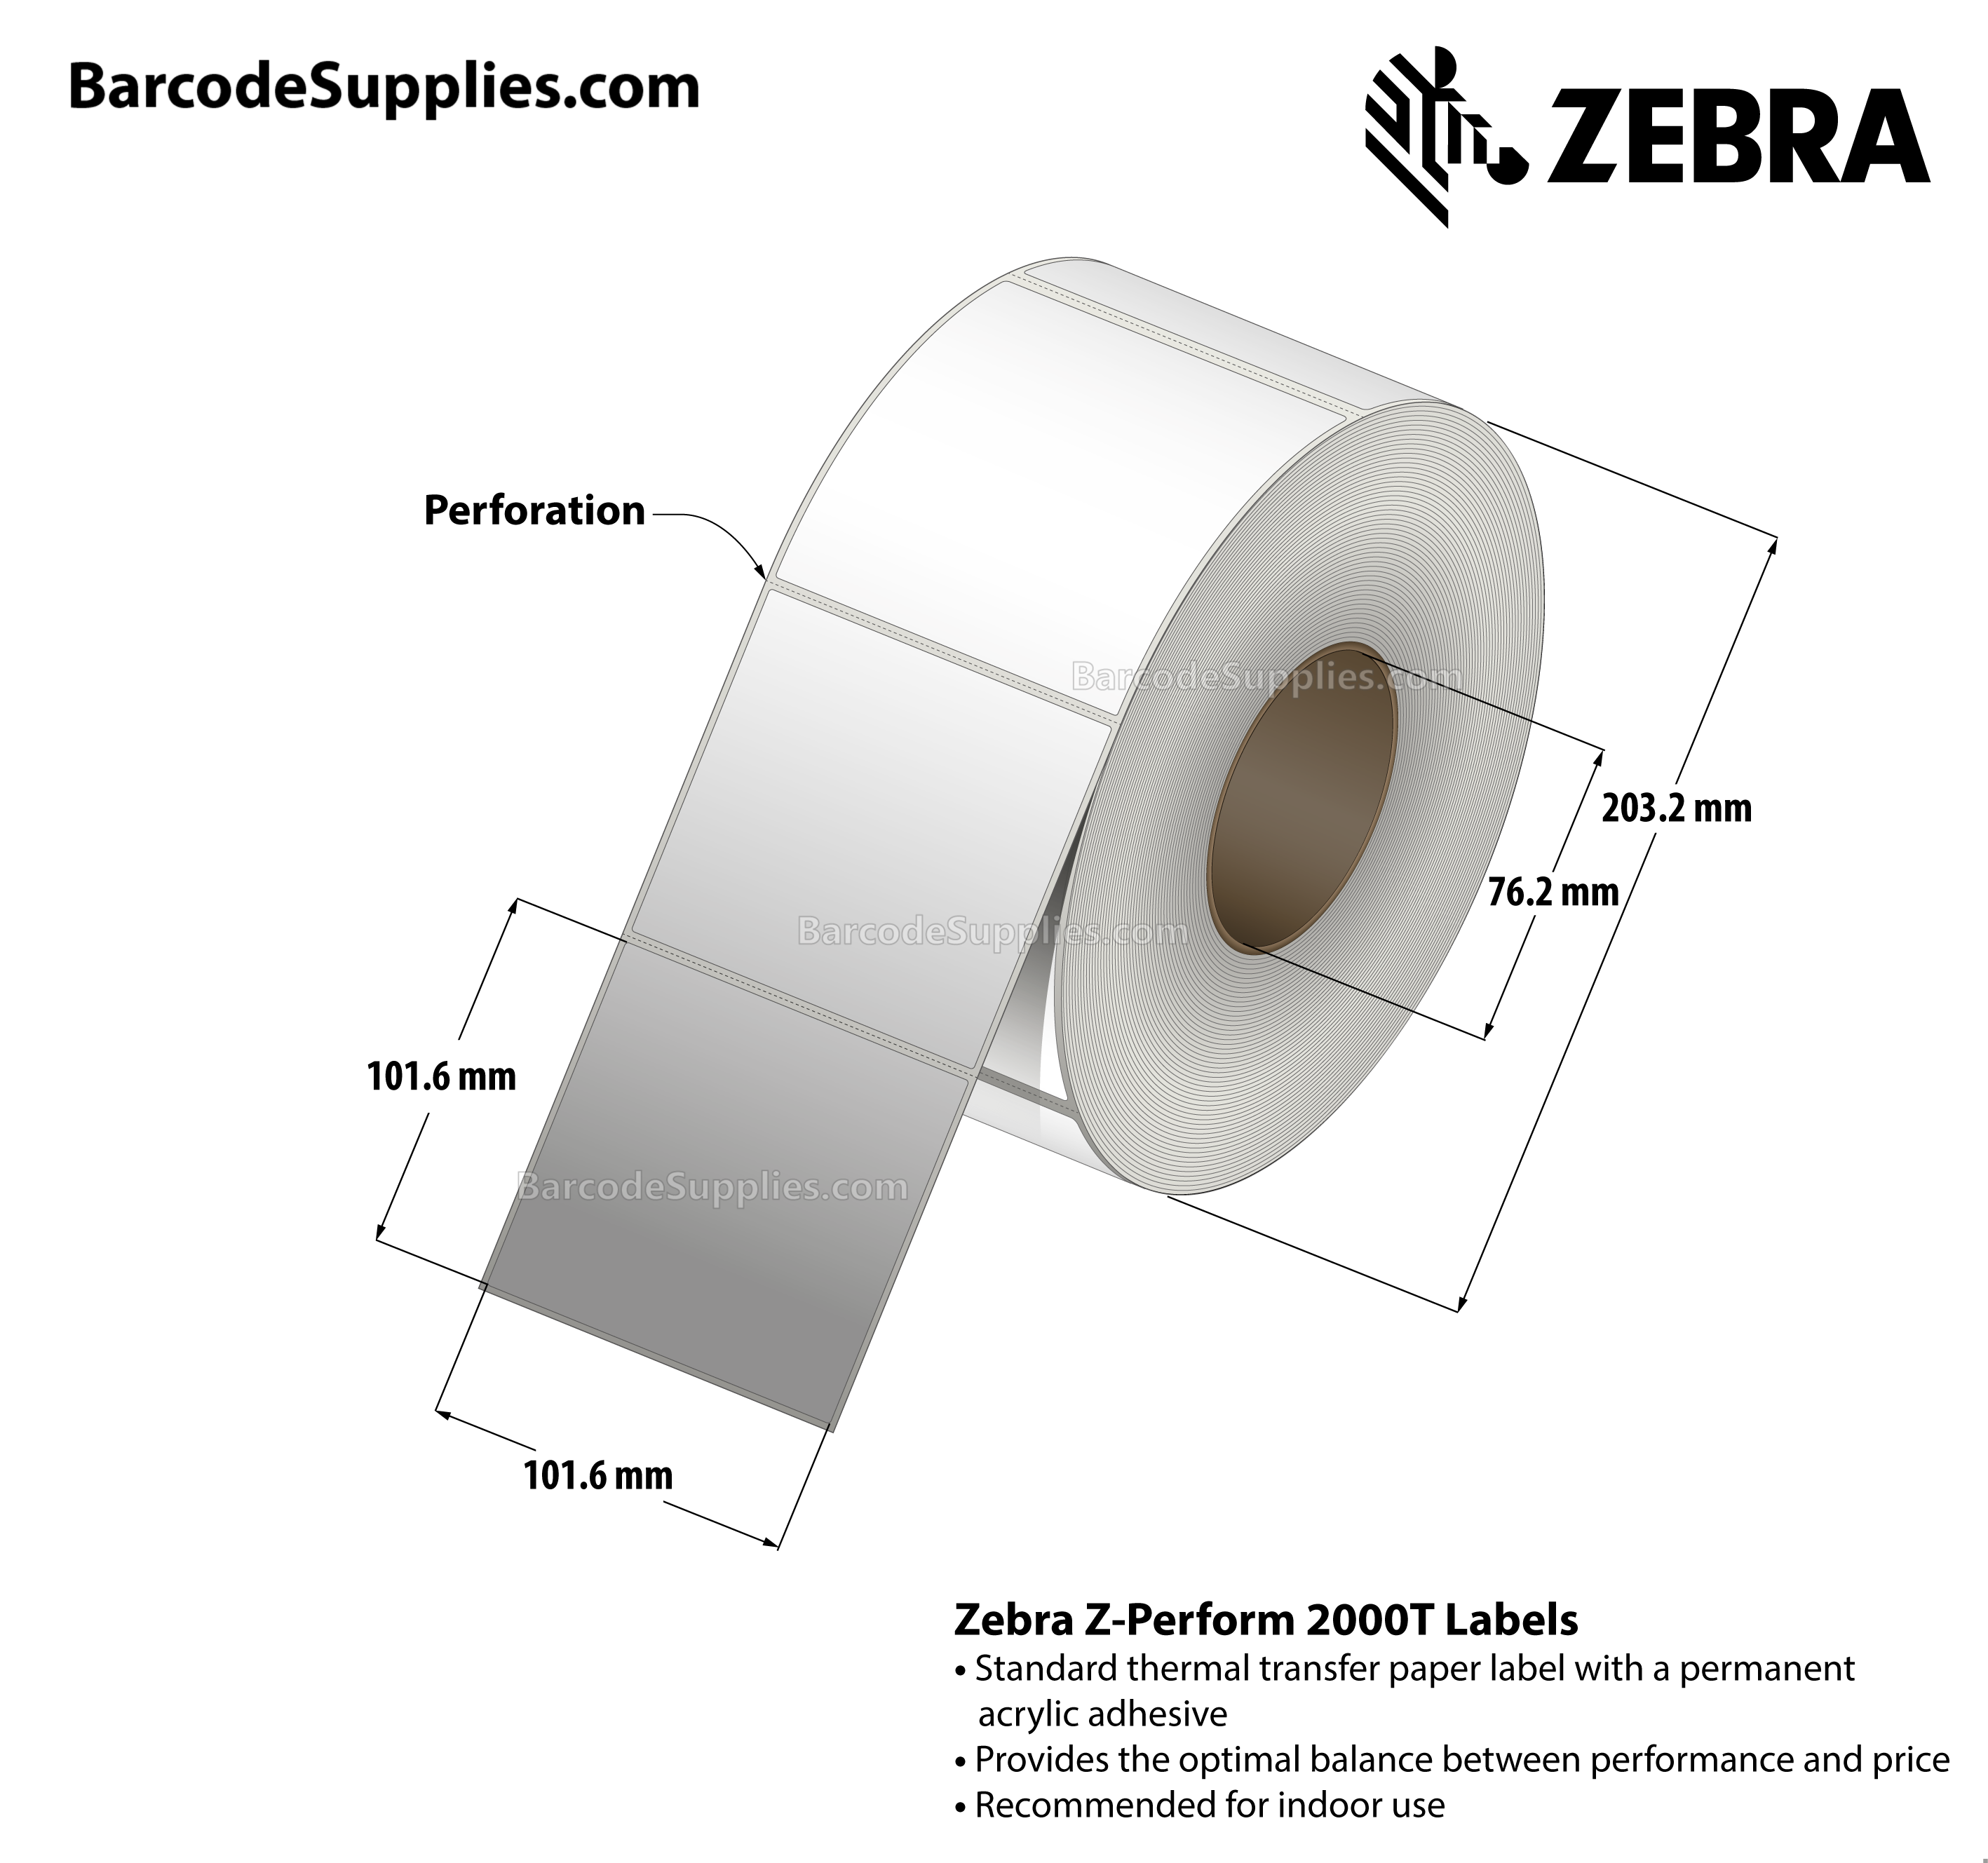 4 x 4 Thermal Transfer White Z-Perform 2000T Labels With Permanent Adhesive - Perforated - 1500 Labels Per Roll - Carton Of 4 Rolls - 6000 Labels Total - MPN: 10000283